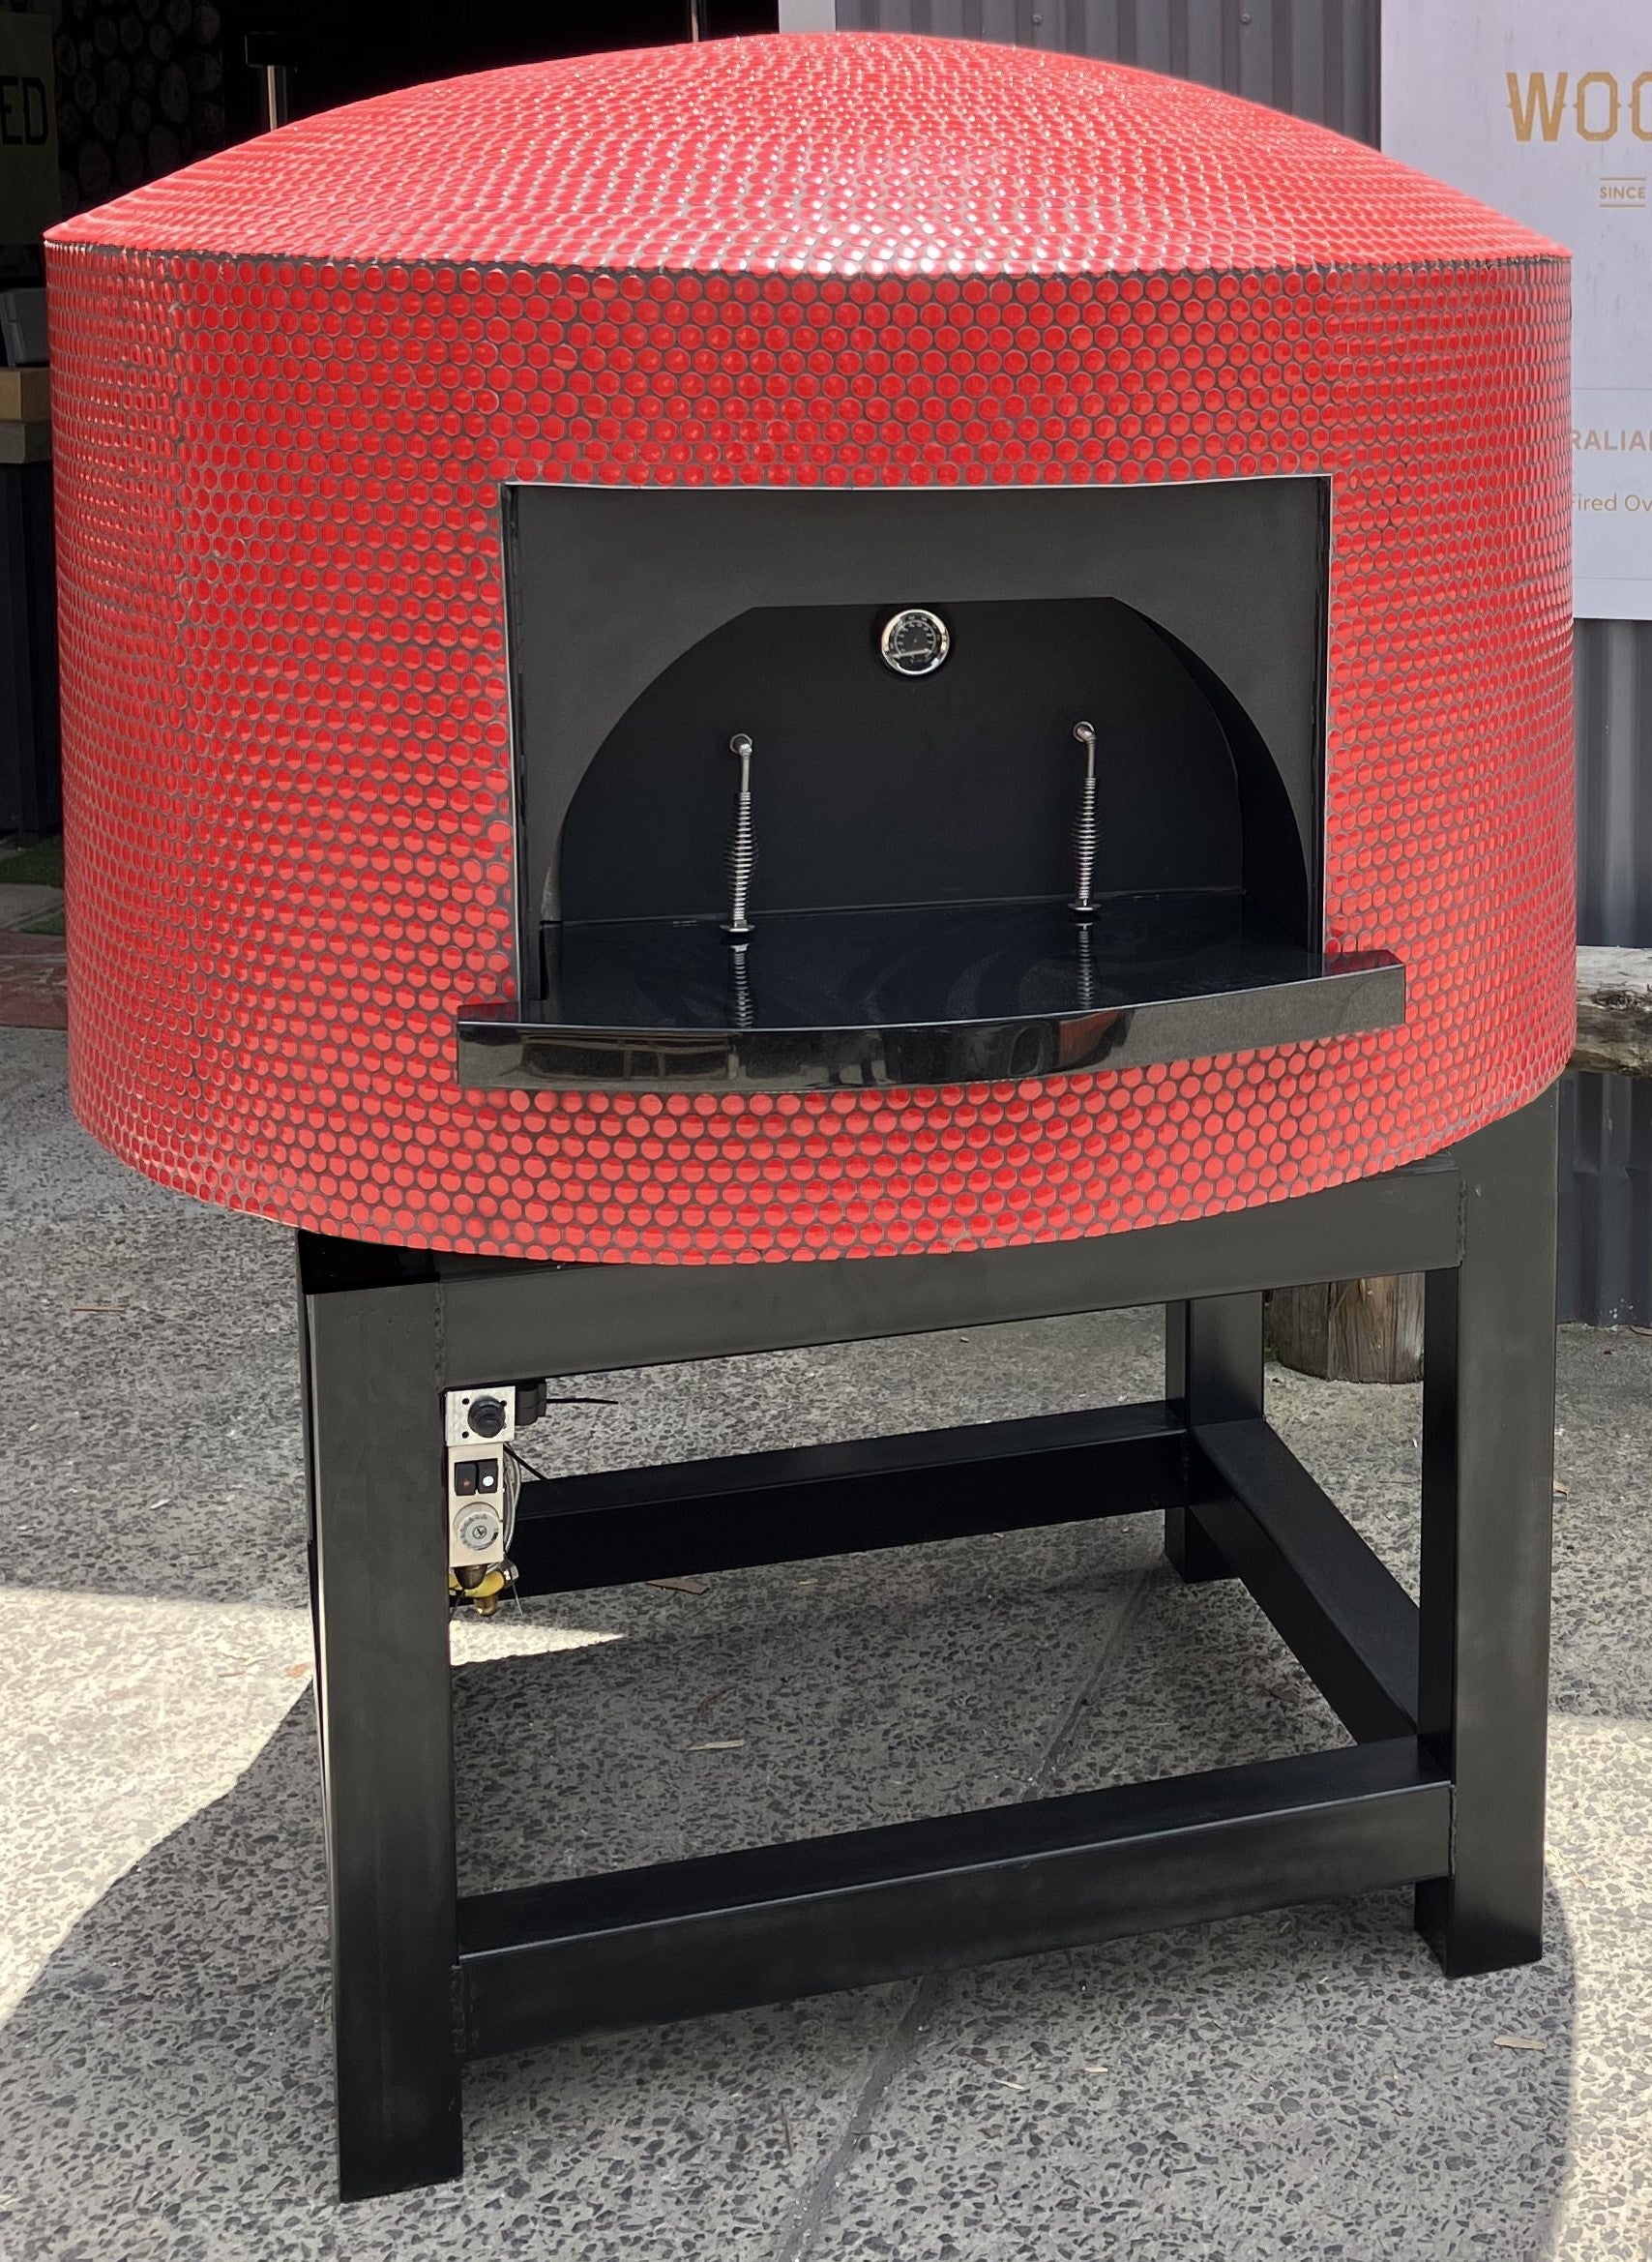 Fiero 950 Napoli style commercial pizza oven - The Woodfired Co